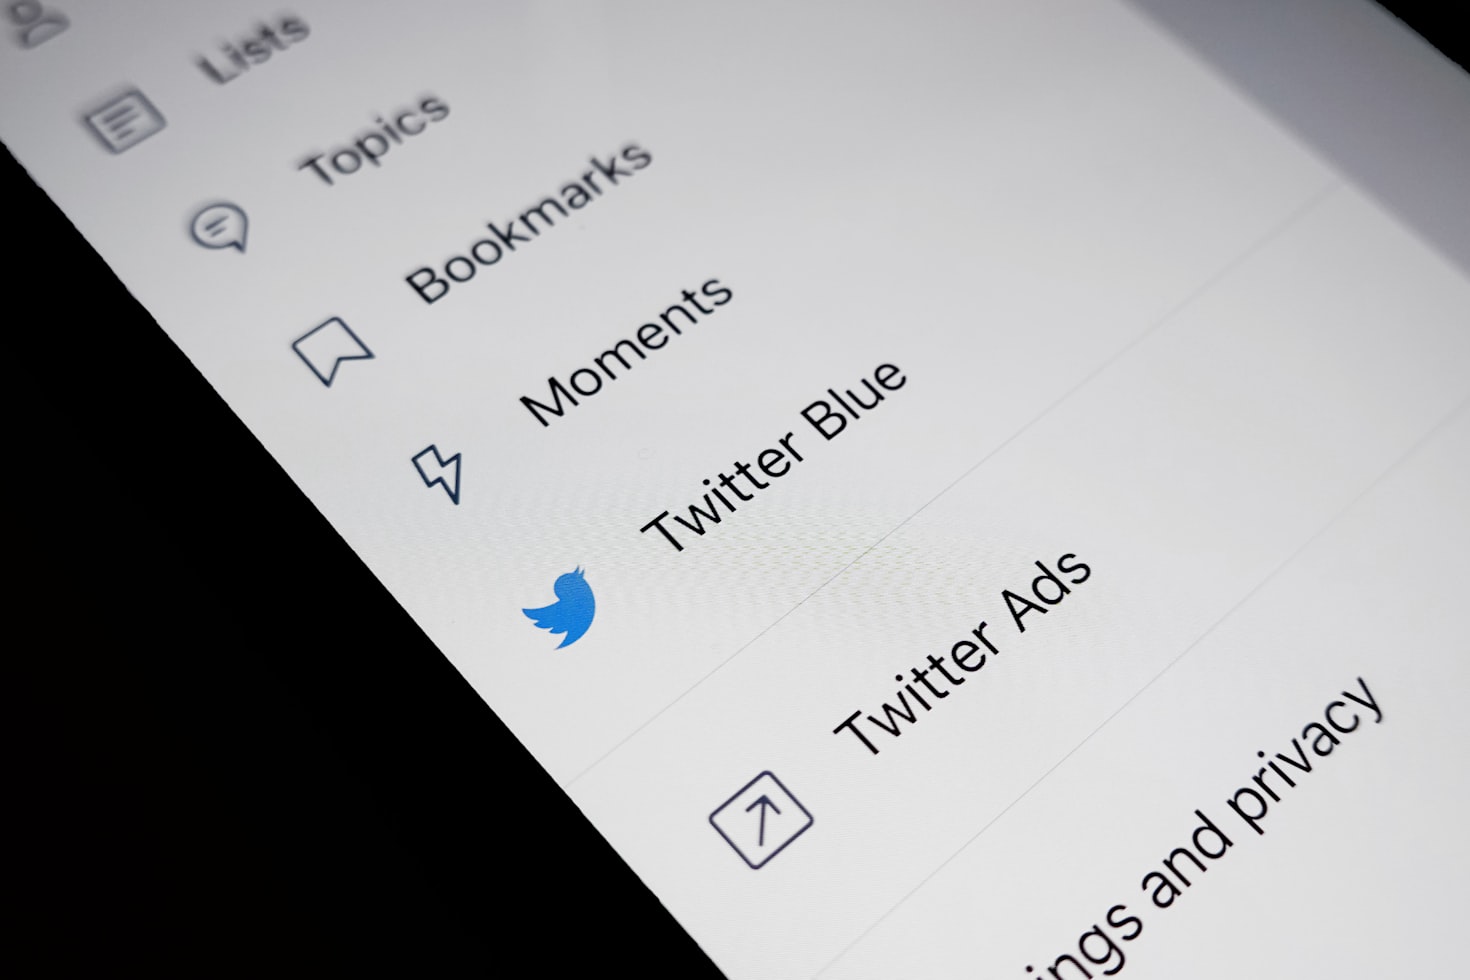 A picture of the Twitter navigation menu.